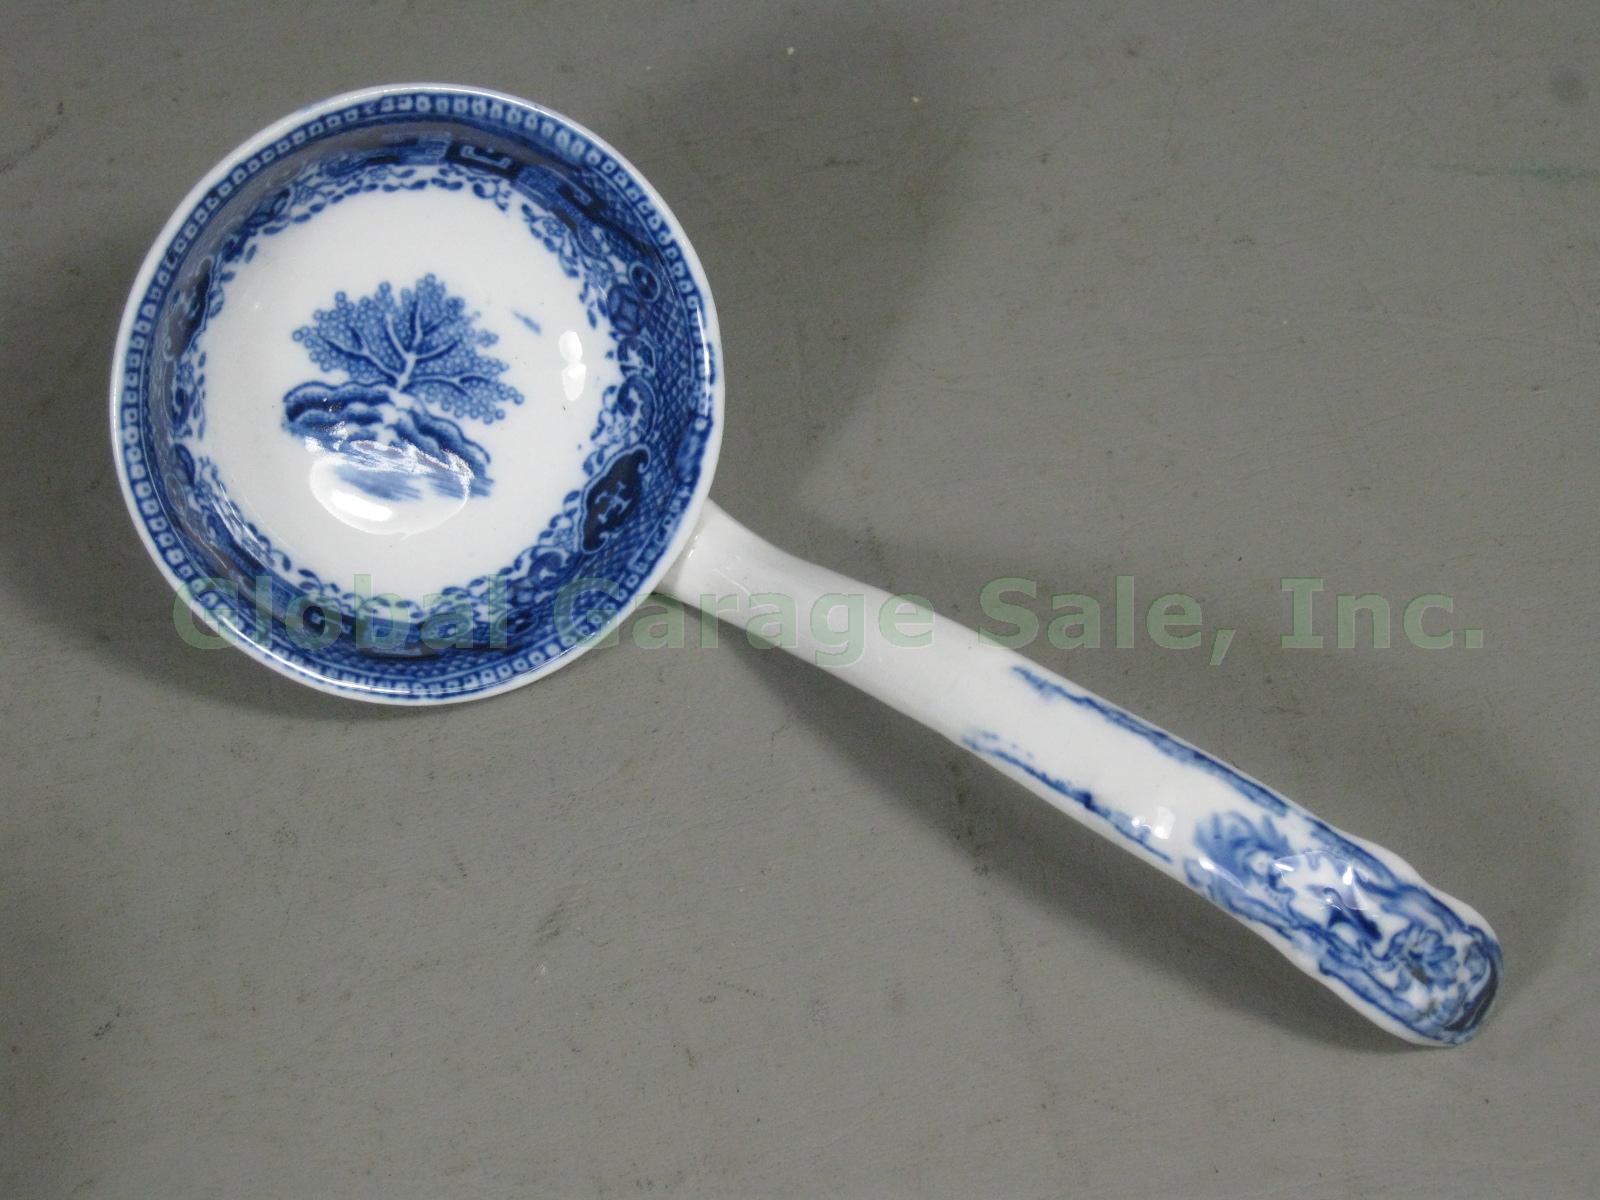 Vintage Antique Royal Doulton Blue Willow Soup Tureen With Underplate & Ladle NR 7